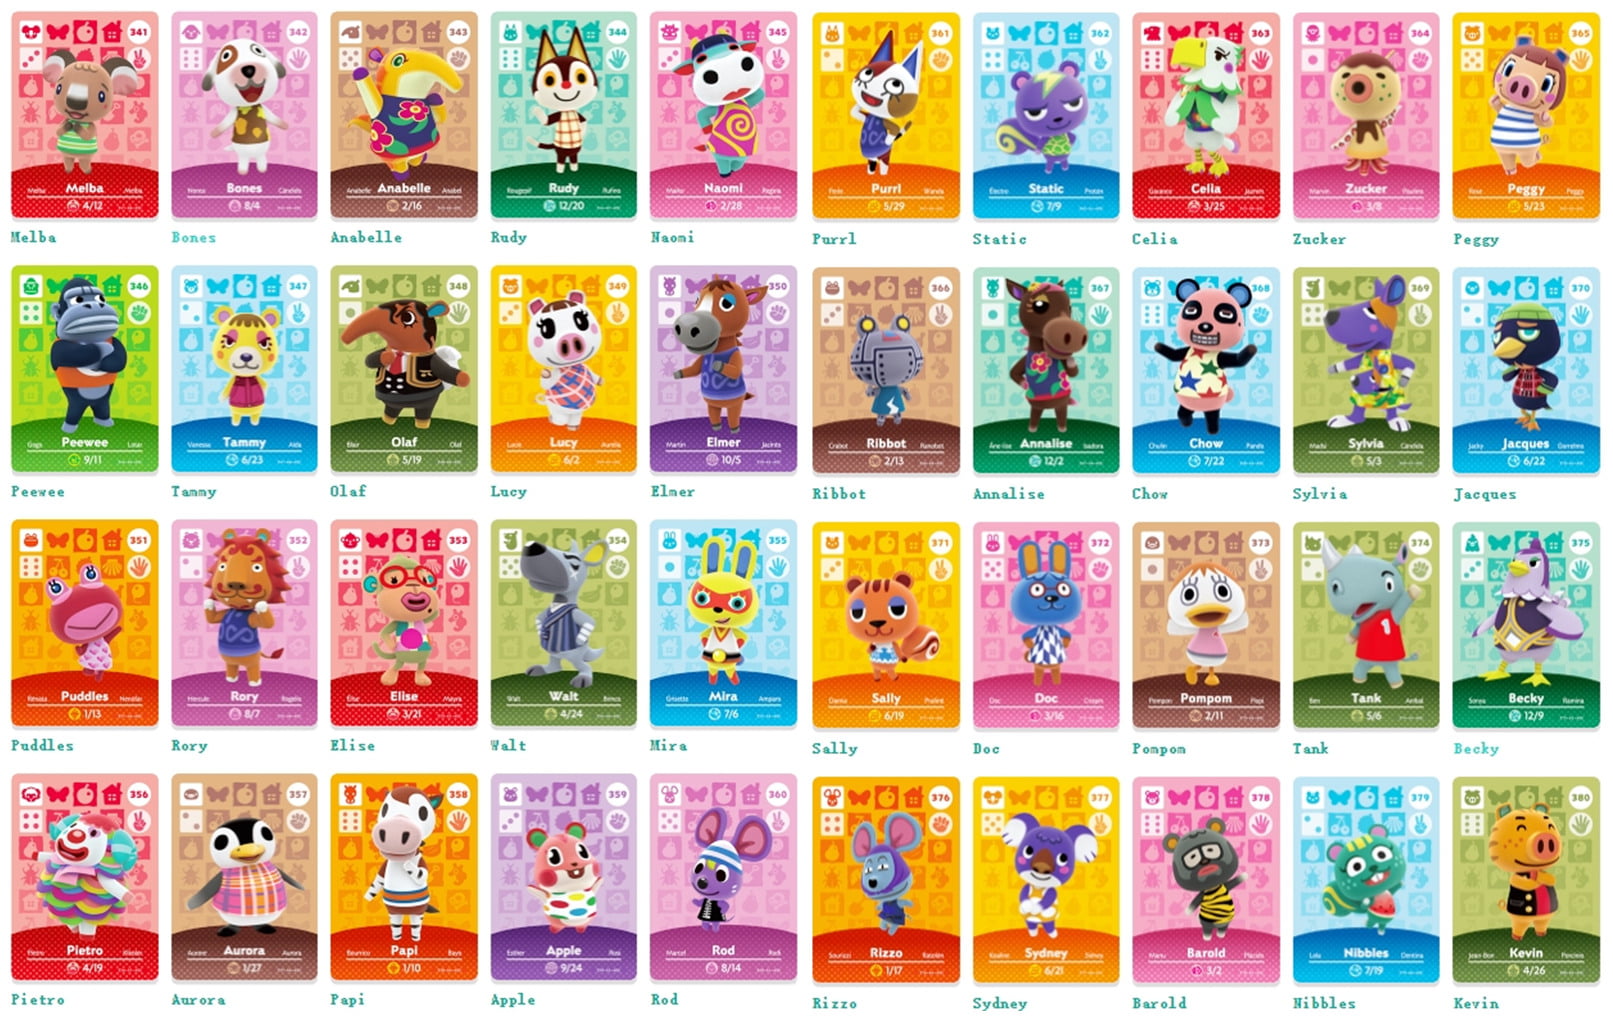 Series 1 Animal Crossing Amiibo Cards. 106-Pcs New Horizons Villagers Cards  Fits Switch Games Animal Crossing New Horizons. 